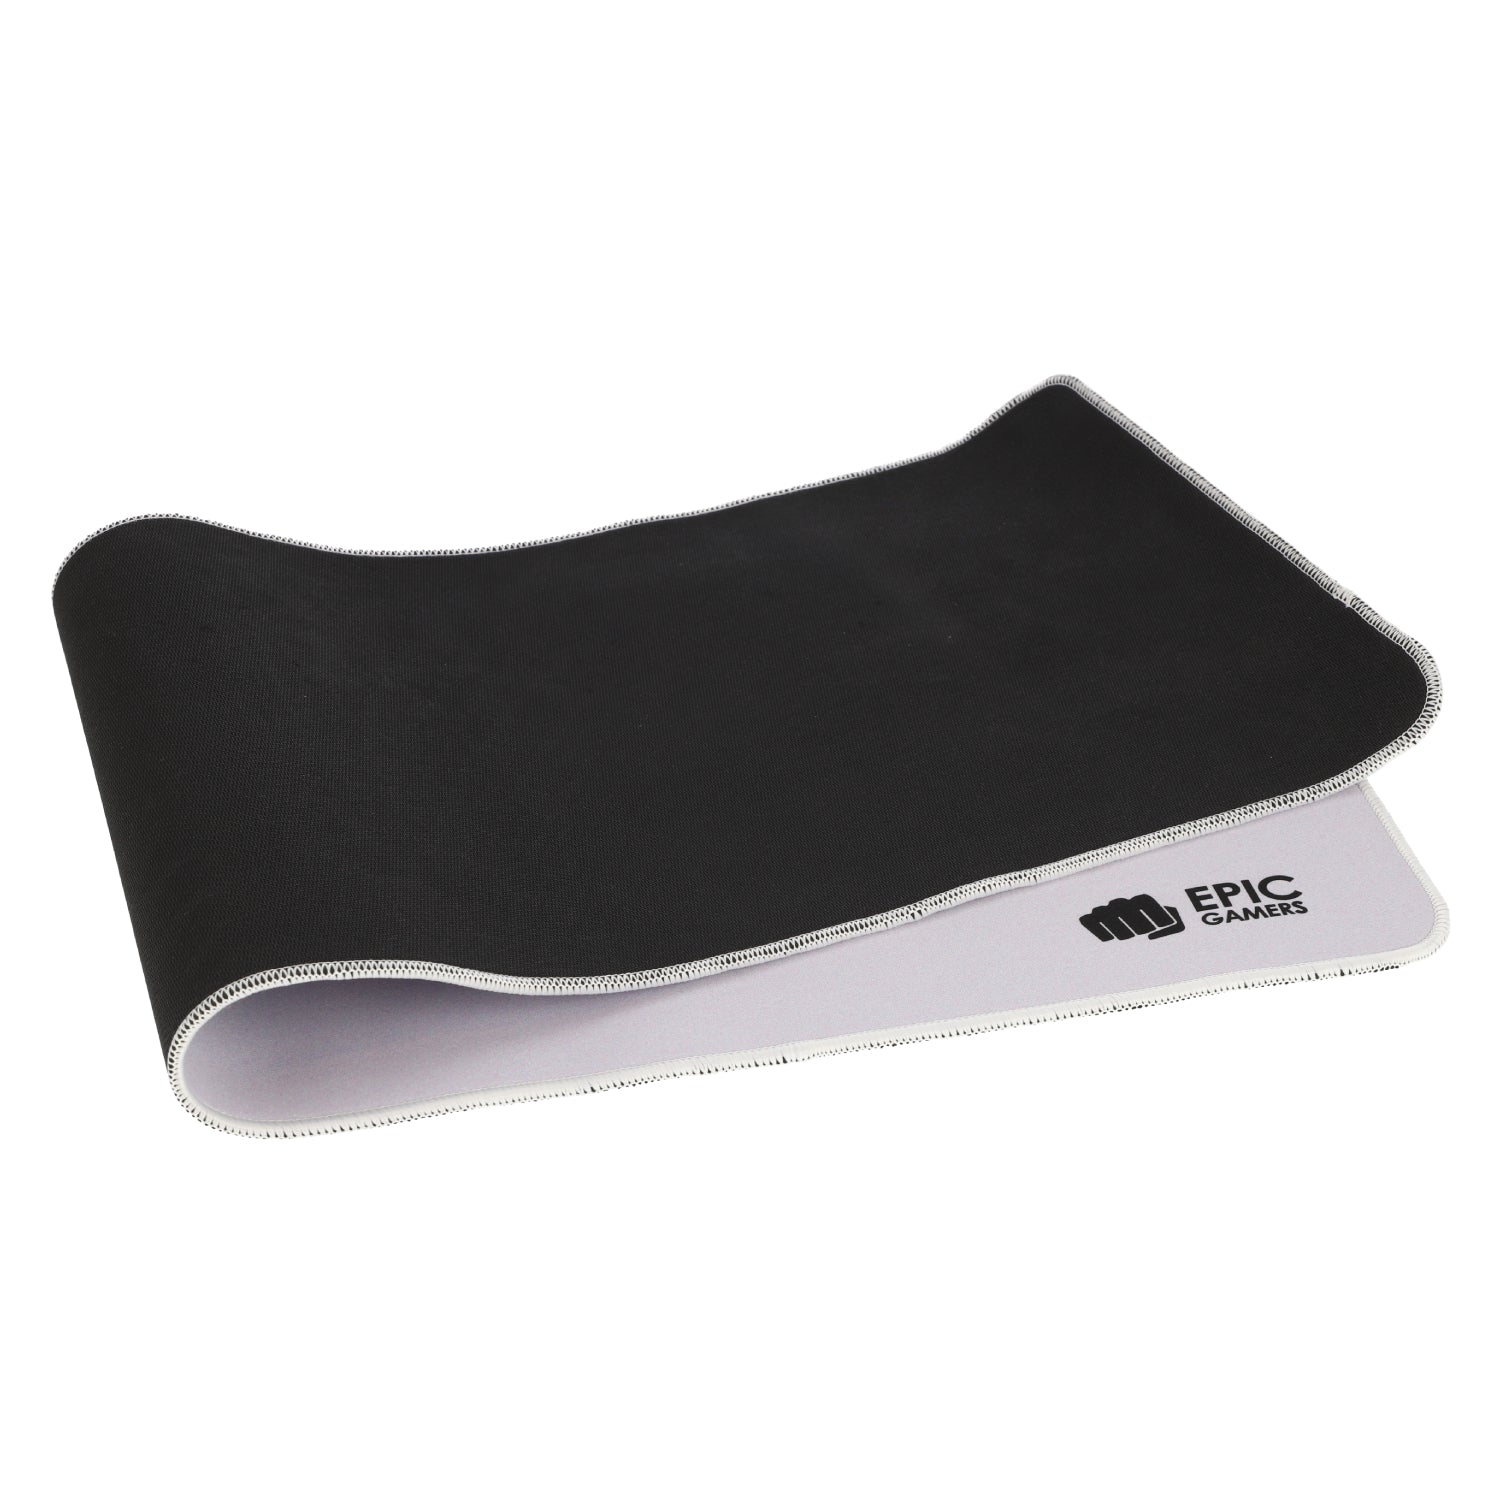 Epic Gamers Gaming Mouse Pad - White - Store 974 | ستور ٩٧٤